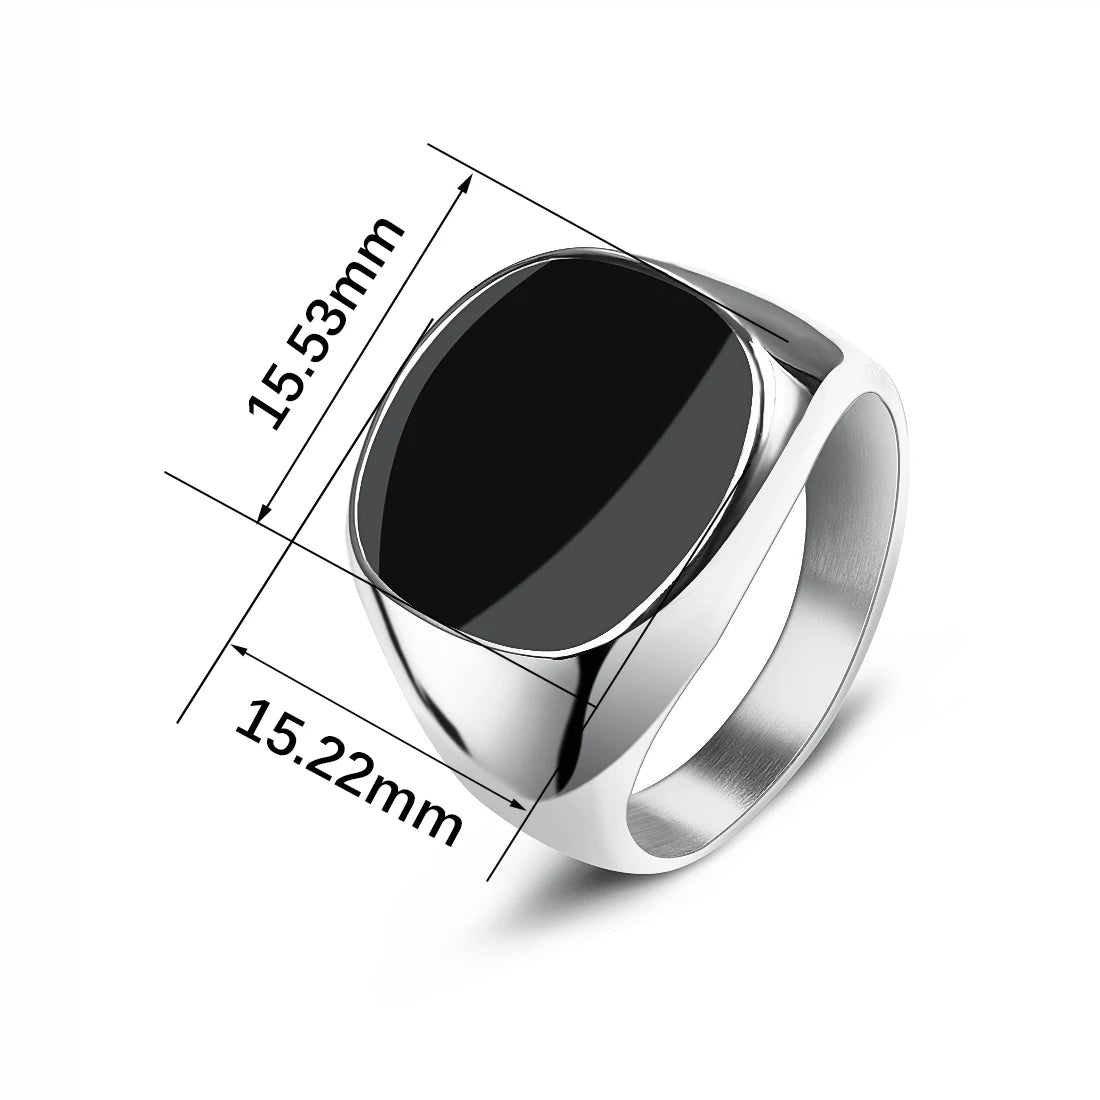 Vleee Punk Fashion Smooth Resin Ring: Stainless Steel, Ideal for Couples in Hip Hop Rock Style, suitable for Men and Women.